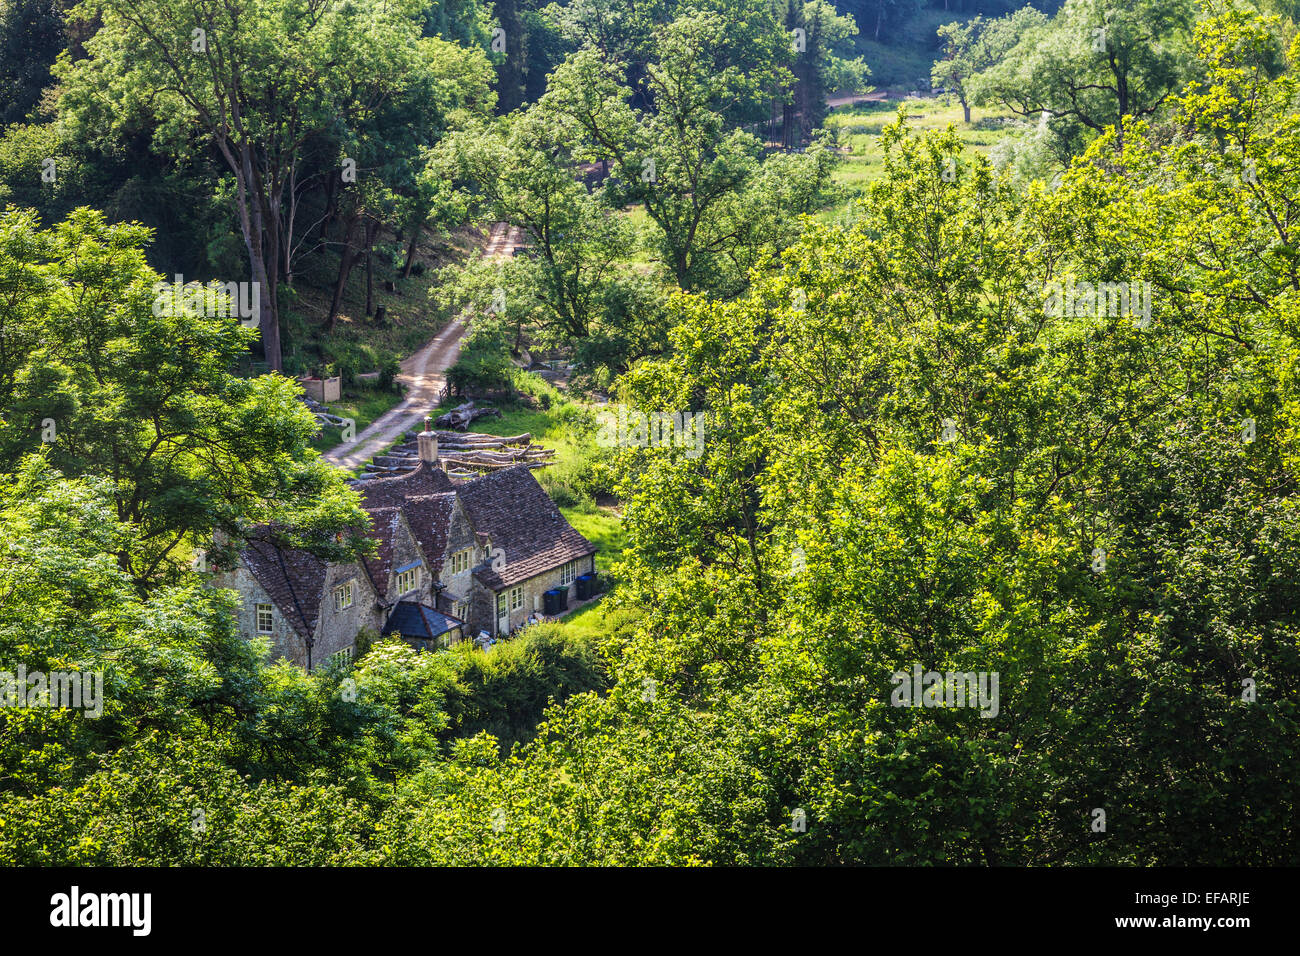 A pretty stone cottage nestled in a wooded valley in the Cotswold countryside. Stock Photo